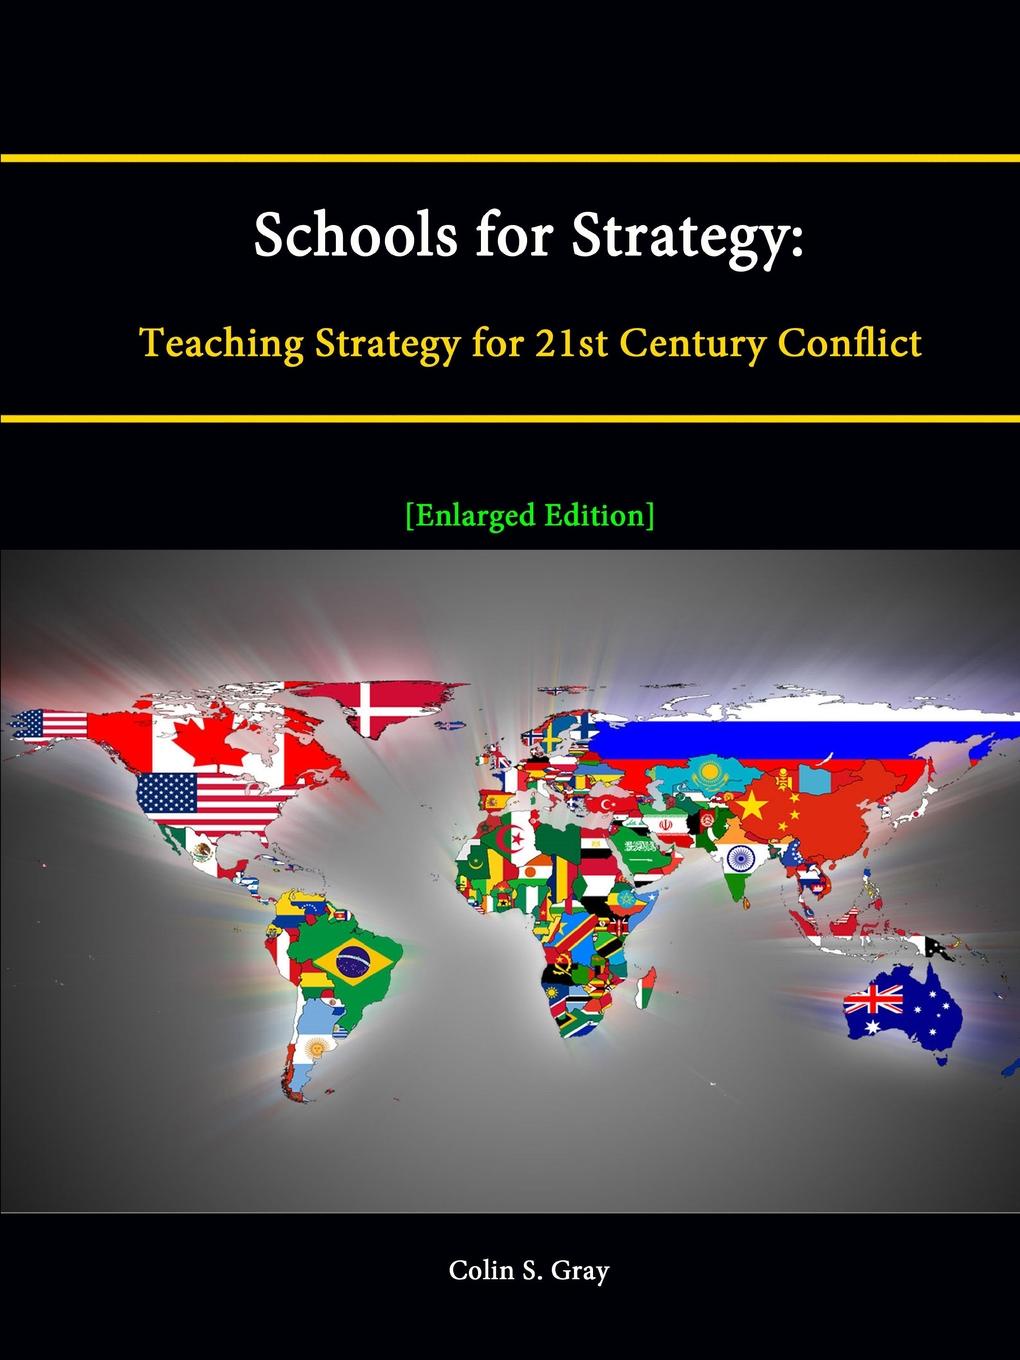 Schools for Strategy. Teaching Strategy for 21st Century Conflict .Enlarged Edition.